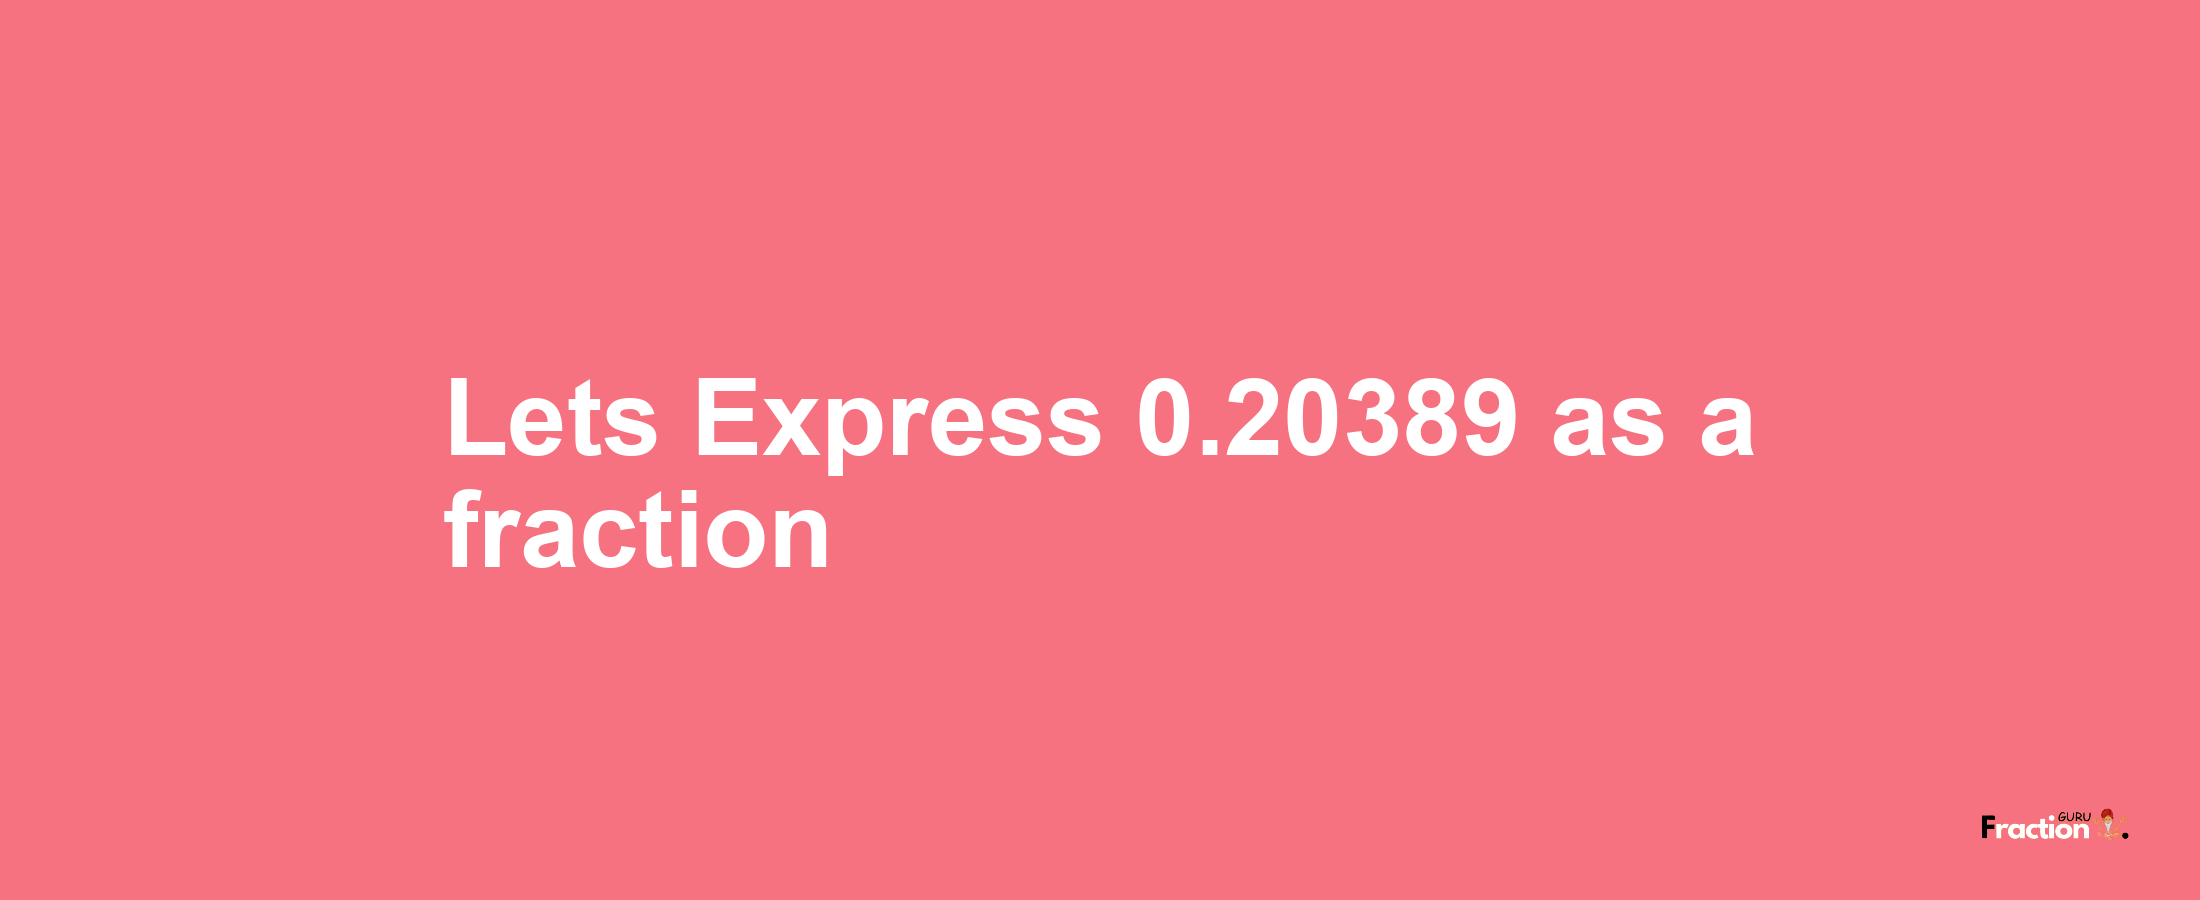 Lets Express 0.20389 as afraction